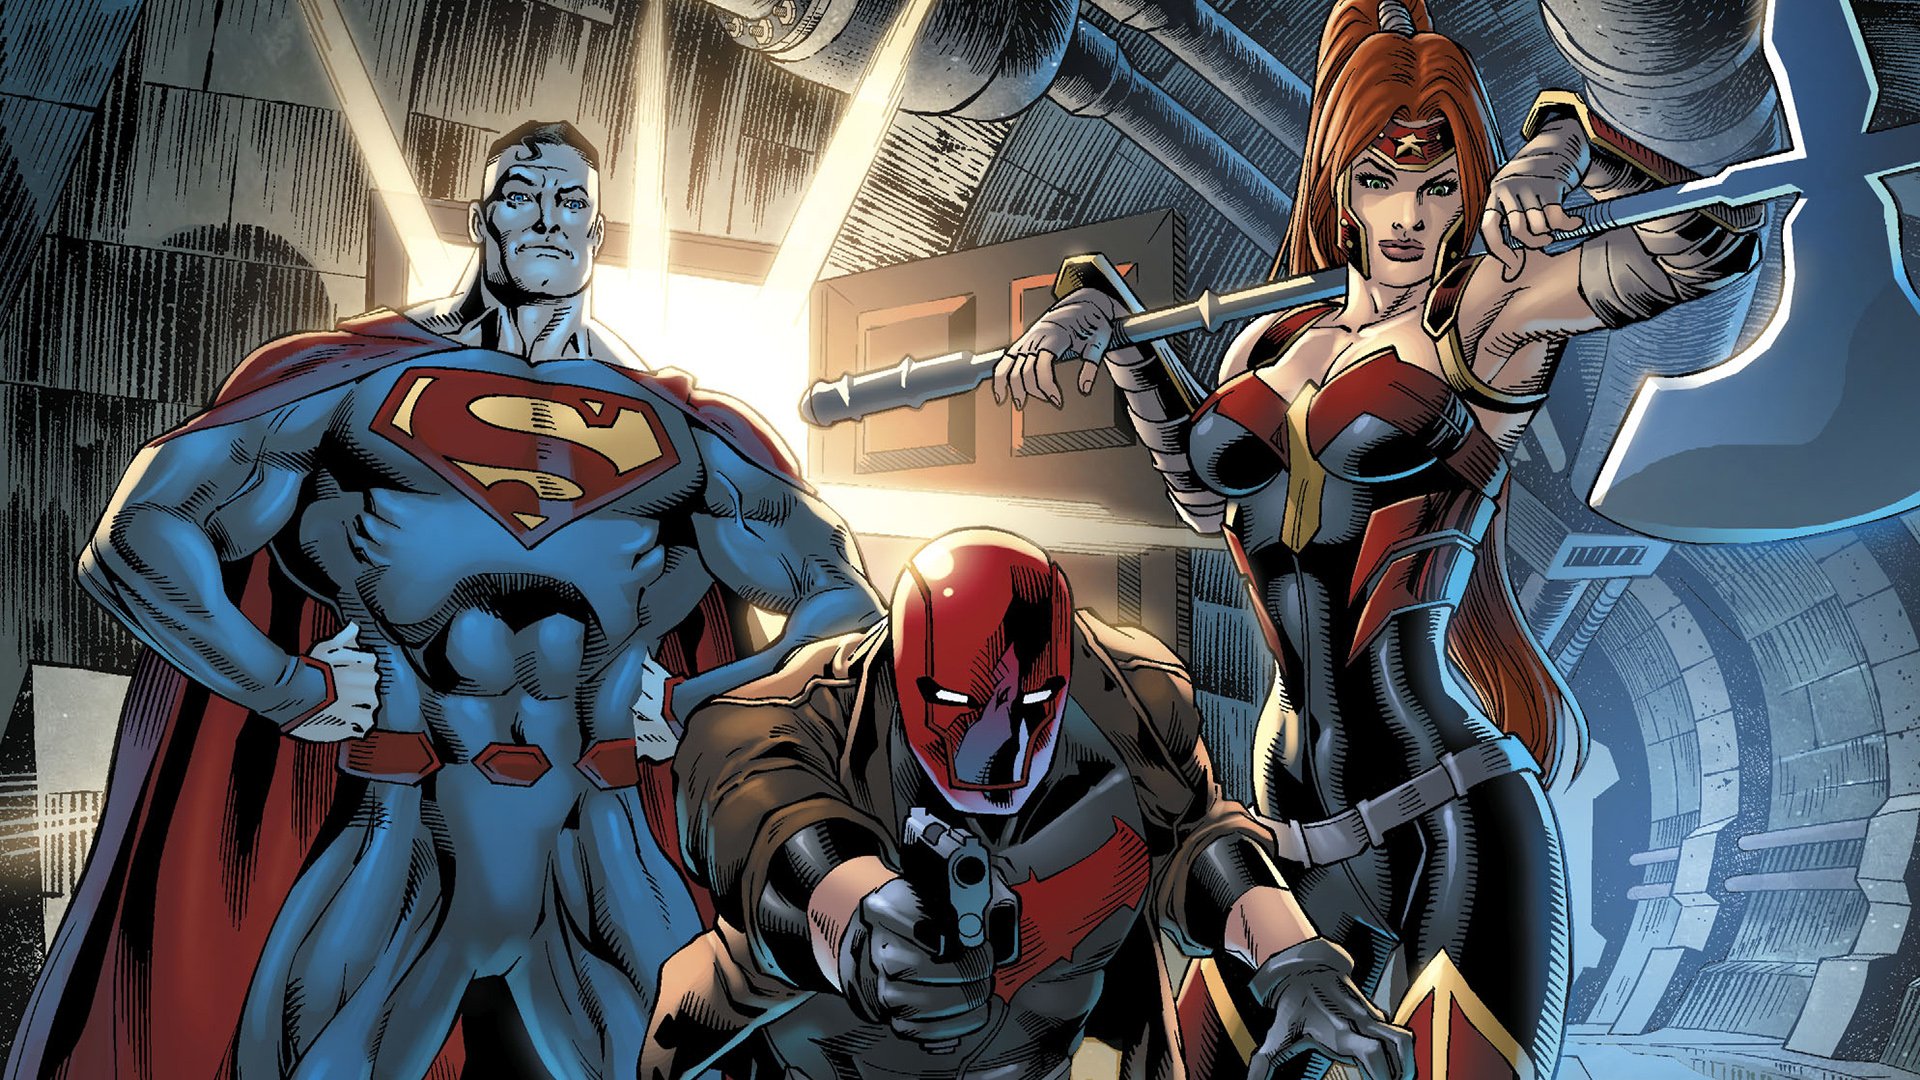 Red Hood and the Outlaws HD Wallpaper | Background Image | 1920x1080 | ID:872428 - Wallpaper Abyss